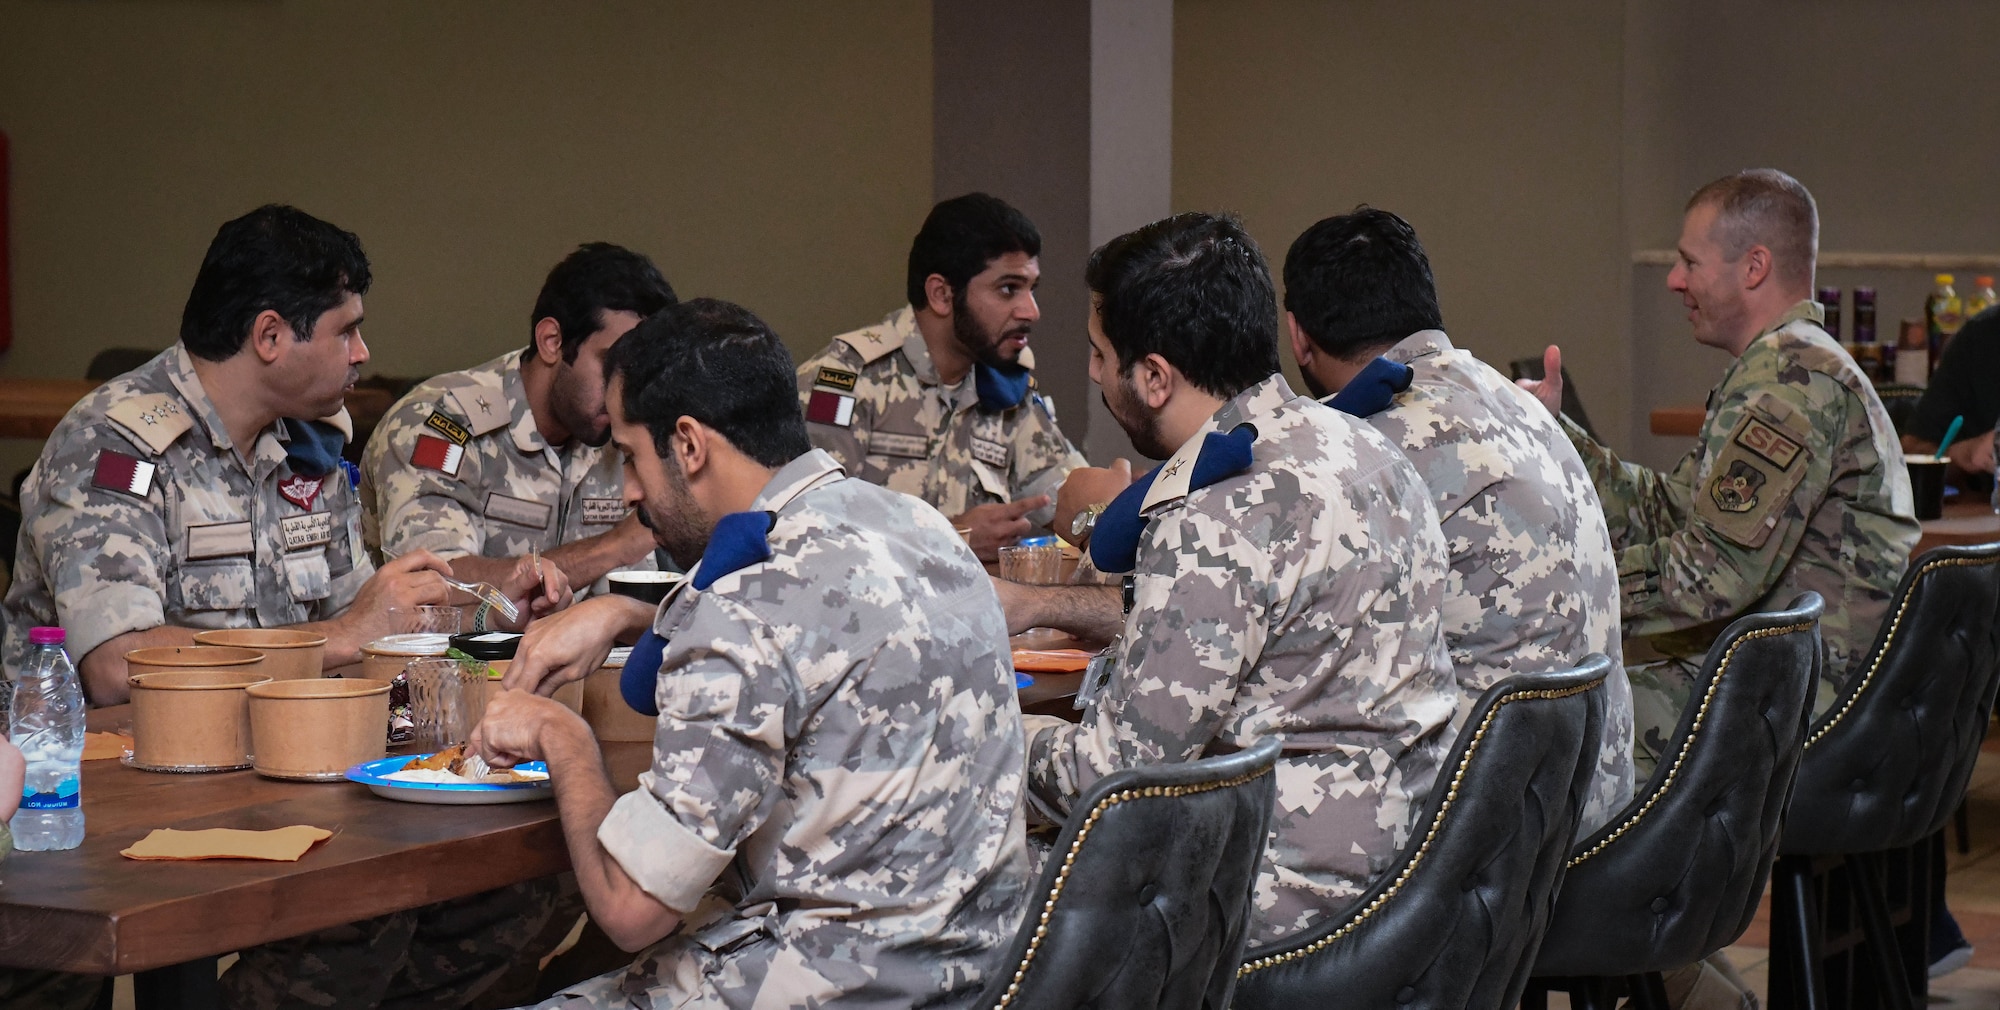 U.S. and Qatari service members sit down for a meal.